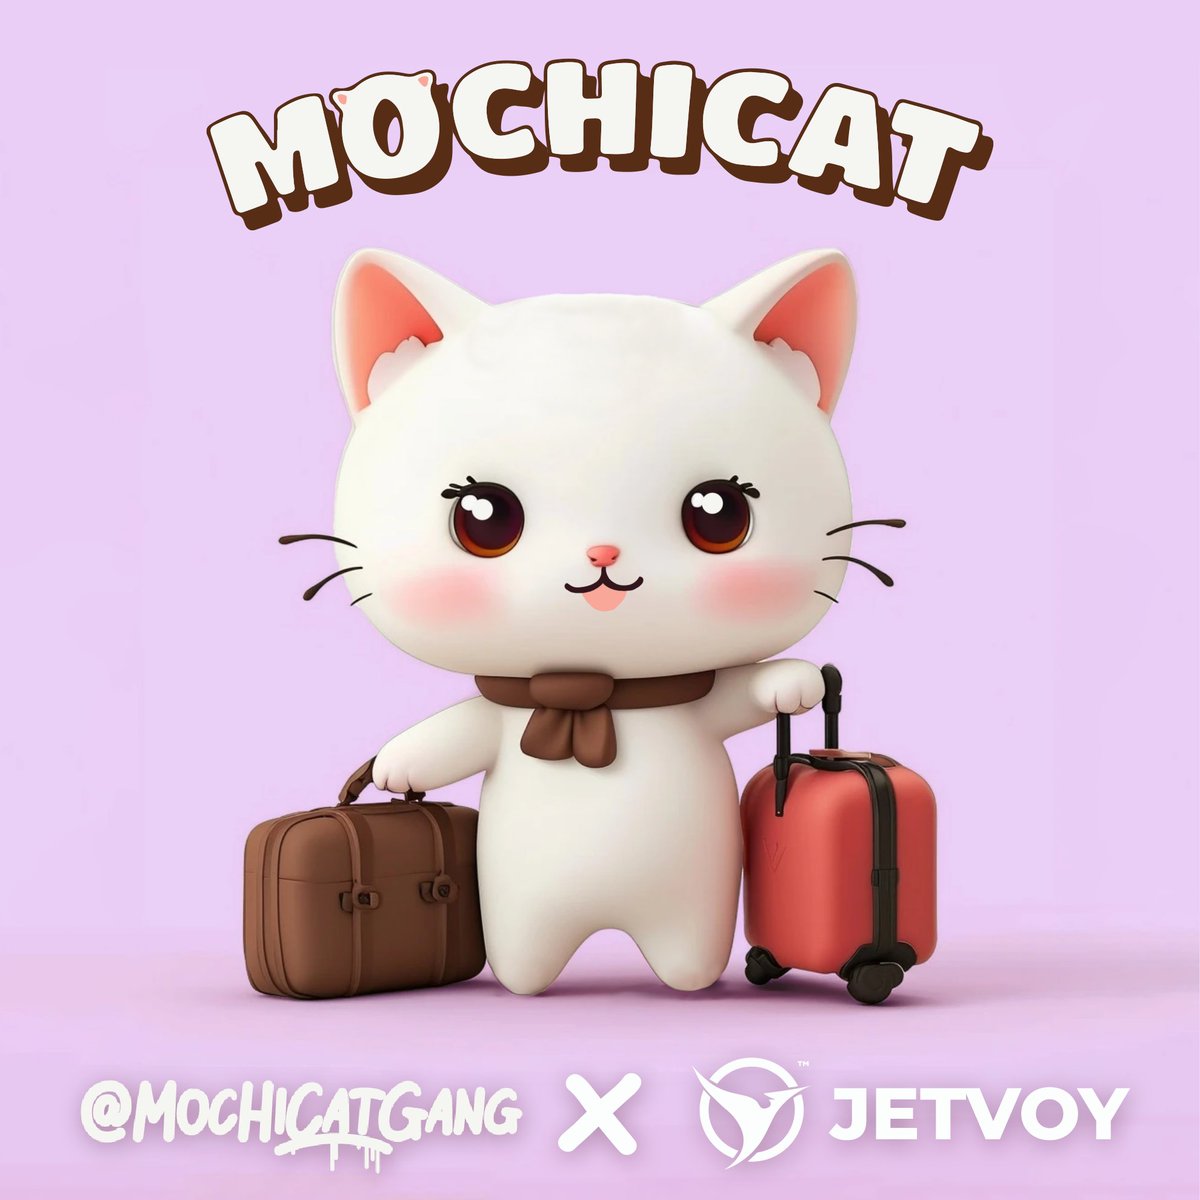 take a vacay with #MOCHICAT and @JetvoyOfficial! 👀 ✈️😻